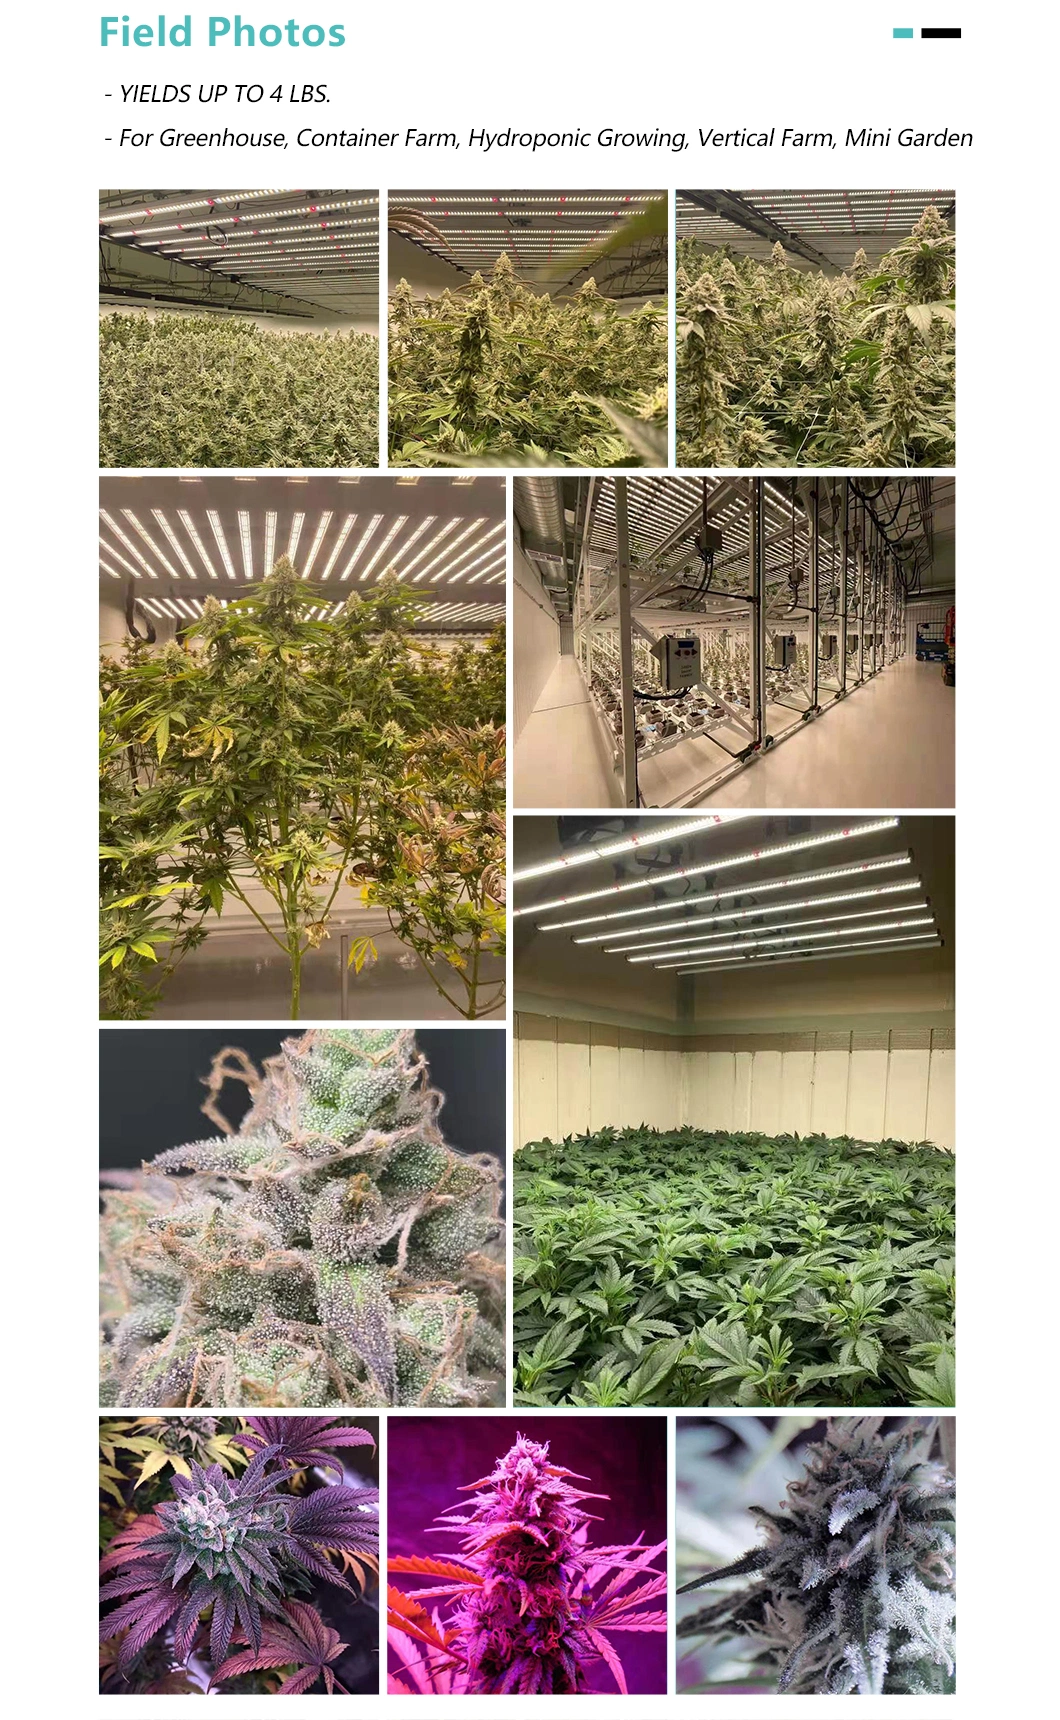 Saturn 800W Flex Smart Control Dimmable Best in Field LED Grow Light Dlc Approved Full Spectrum Efficacy up to 2.8 Umol/J for Grenhouse/Grow Tent